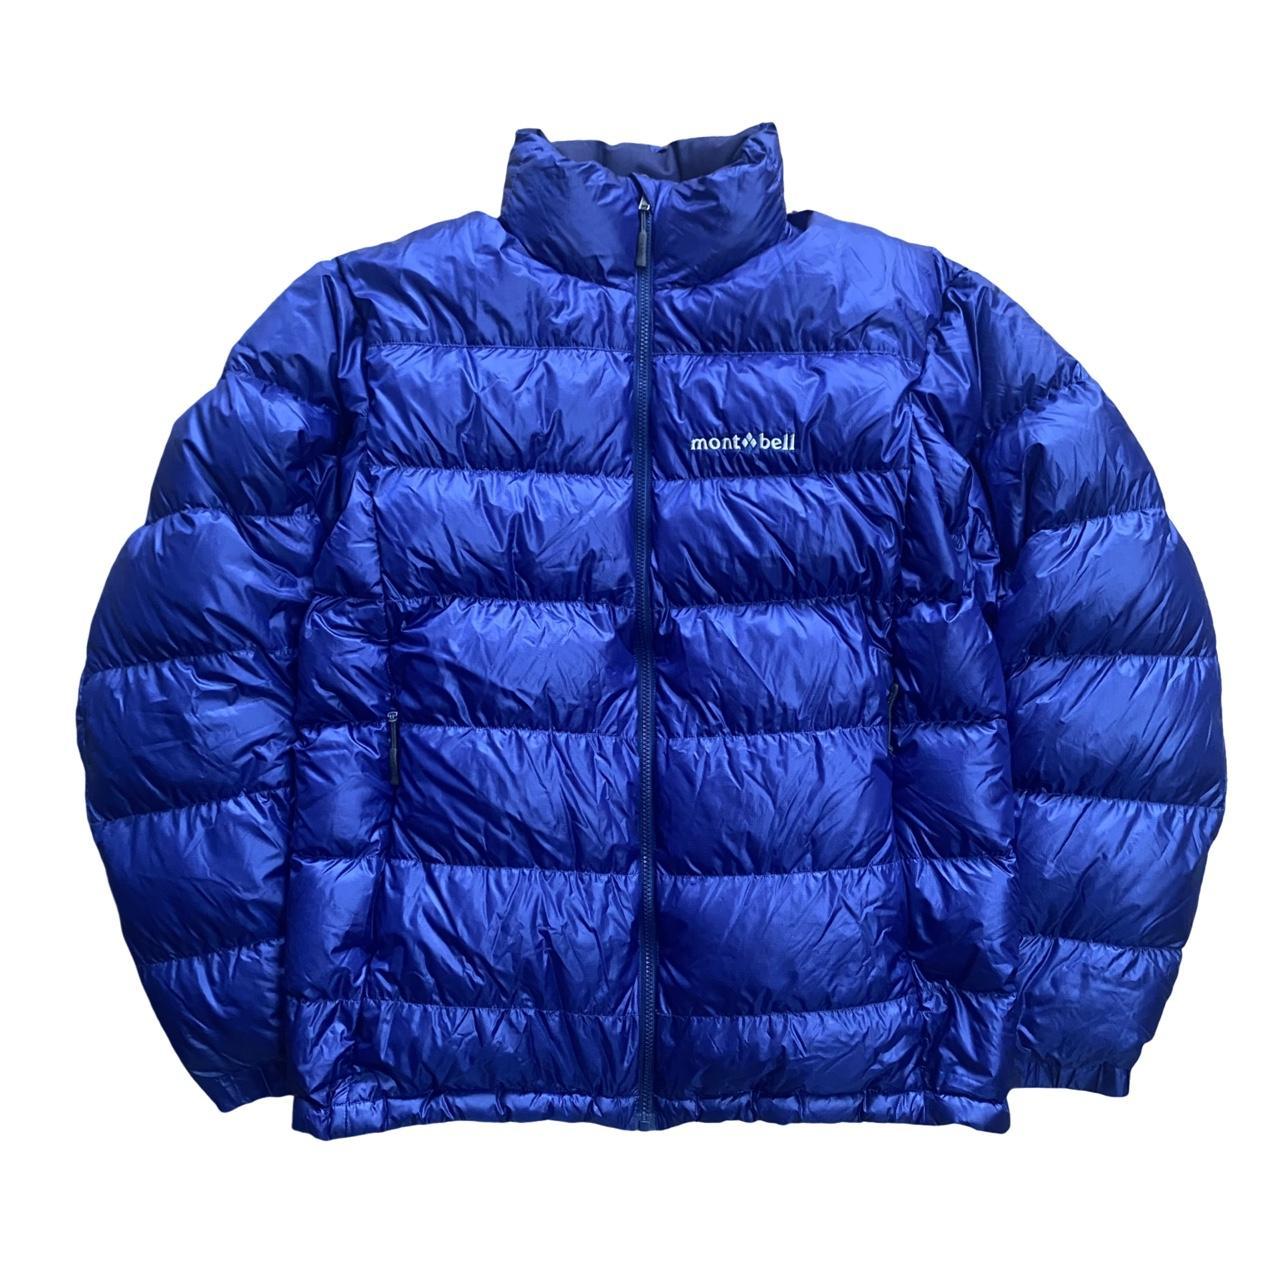 montbell puffer in blue size M japan such a nice... - Depop